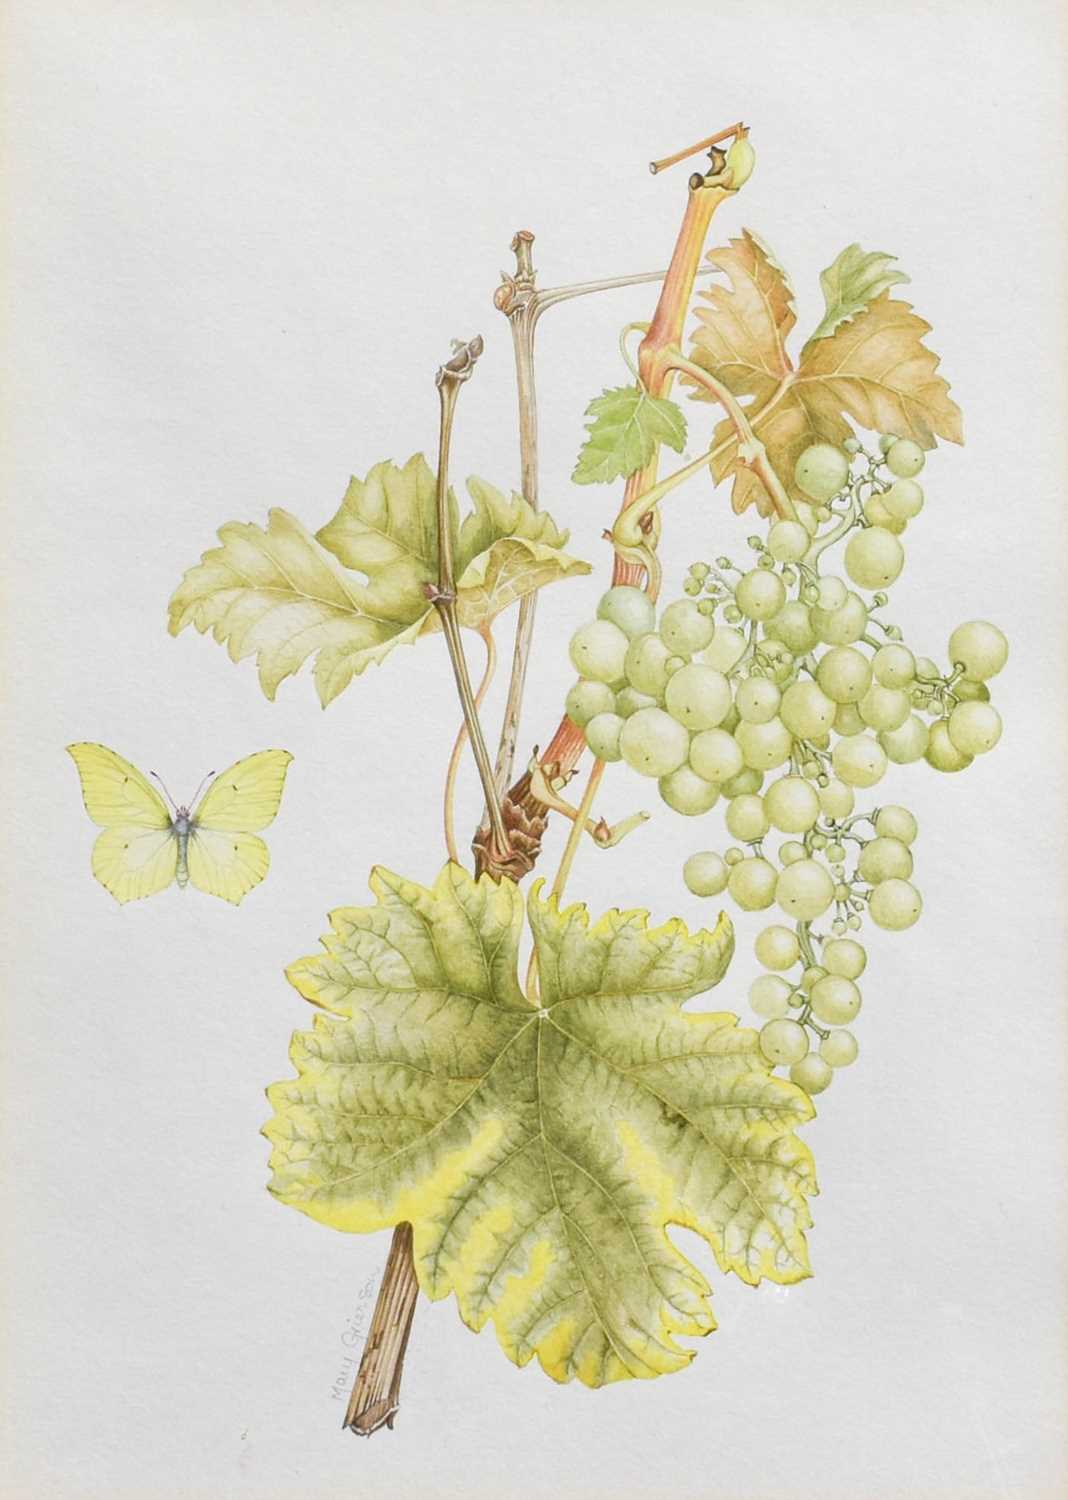 Mary Grierson (1912-2012) "Common Grape Vine" Signed in pencil, watercolour, 33cm by 23.5cm With